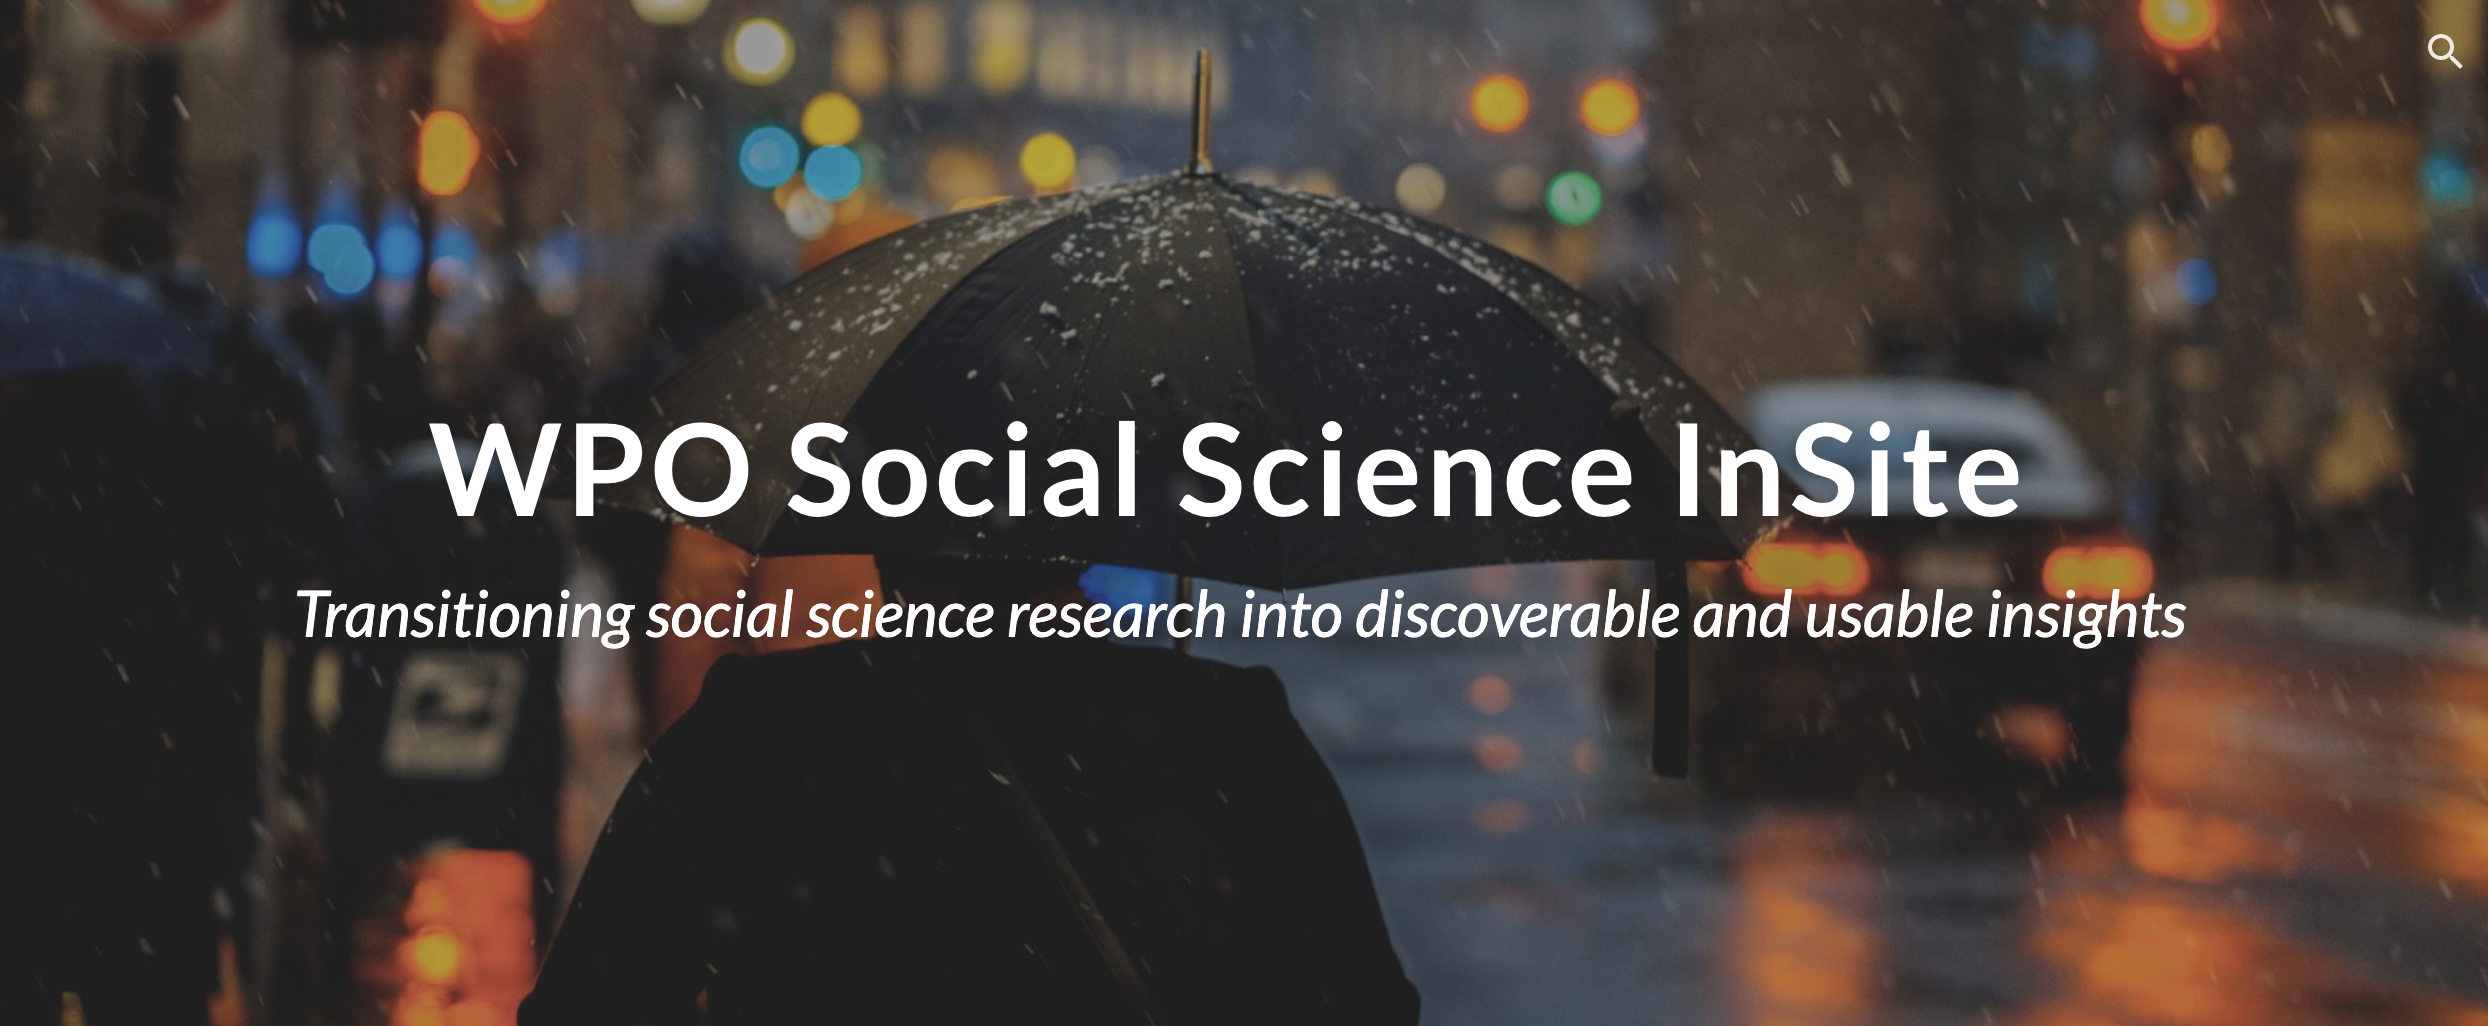 Click to visit the Social Science Insite (Google Site for NOAA & NOAA Affiliates)